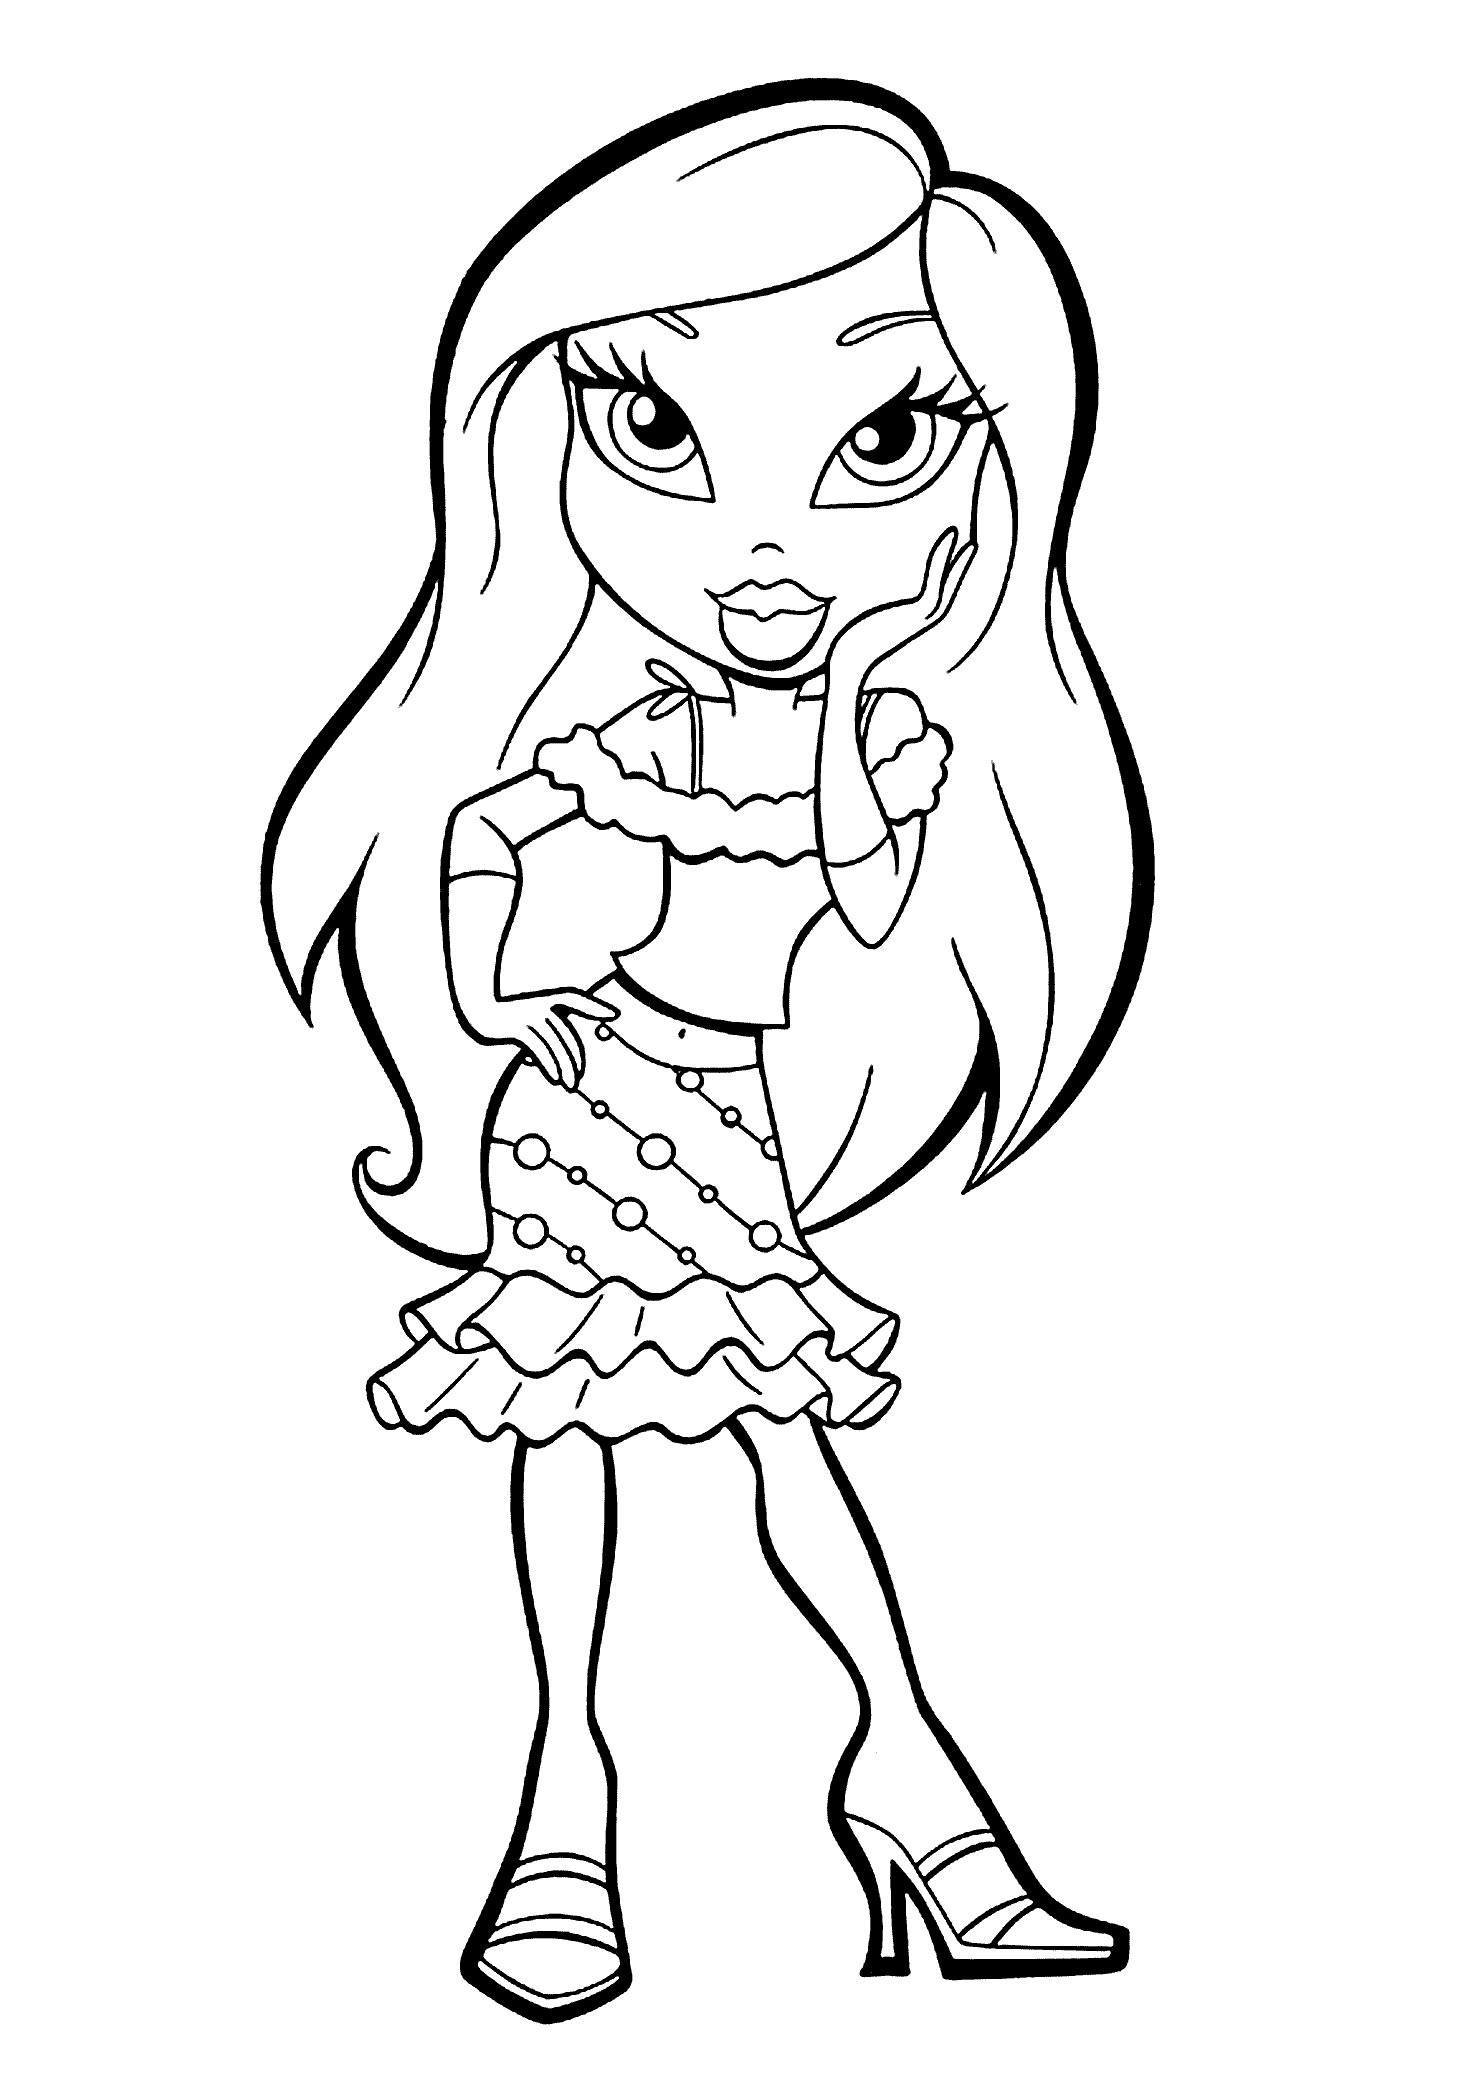 Girl Cartoon Characters Coloring Pages - Coloring Home